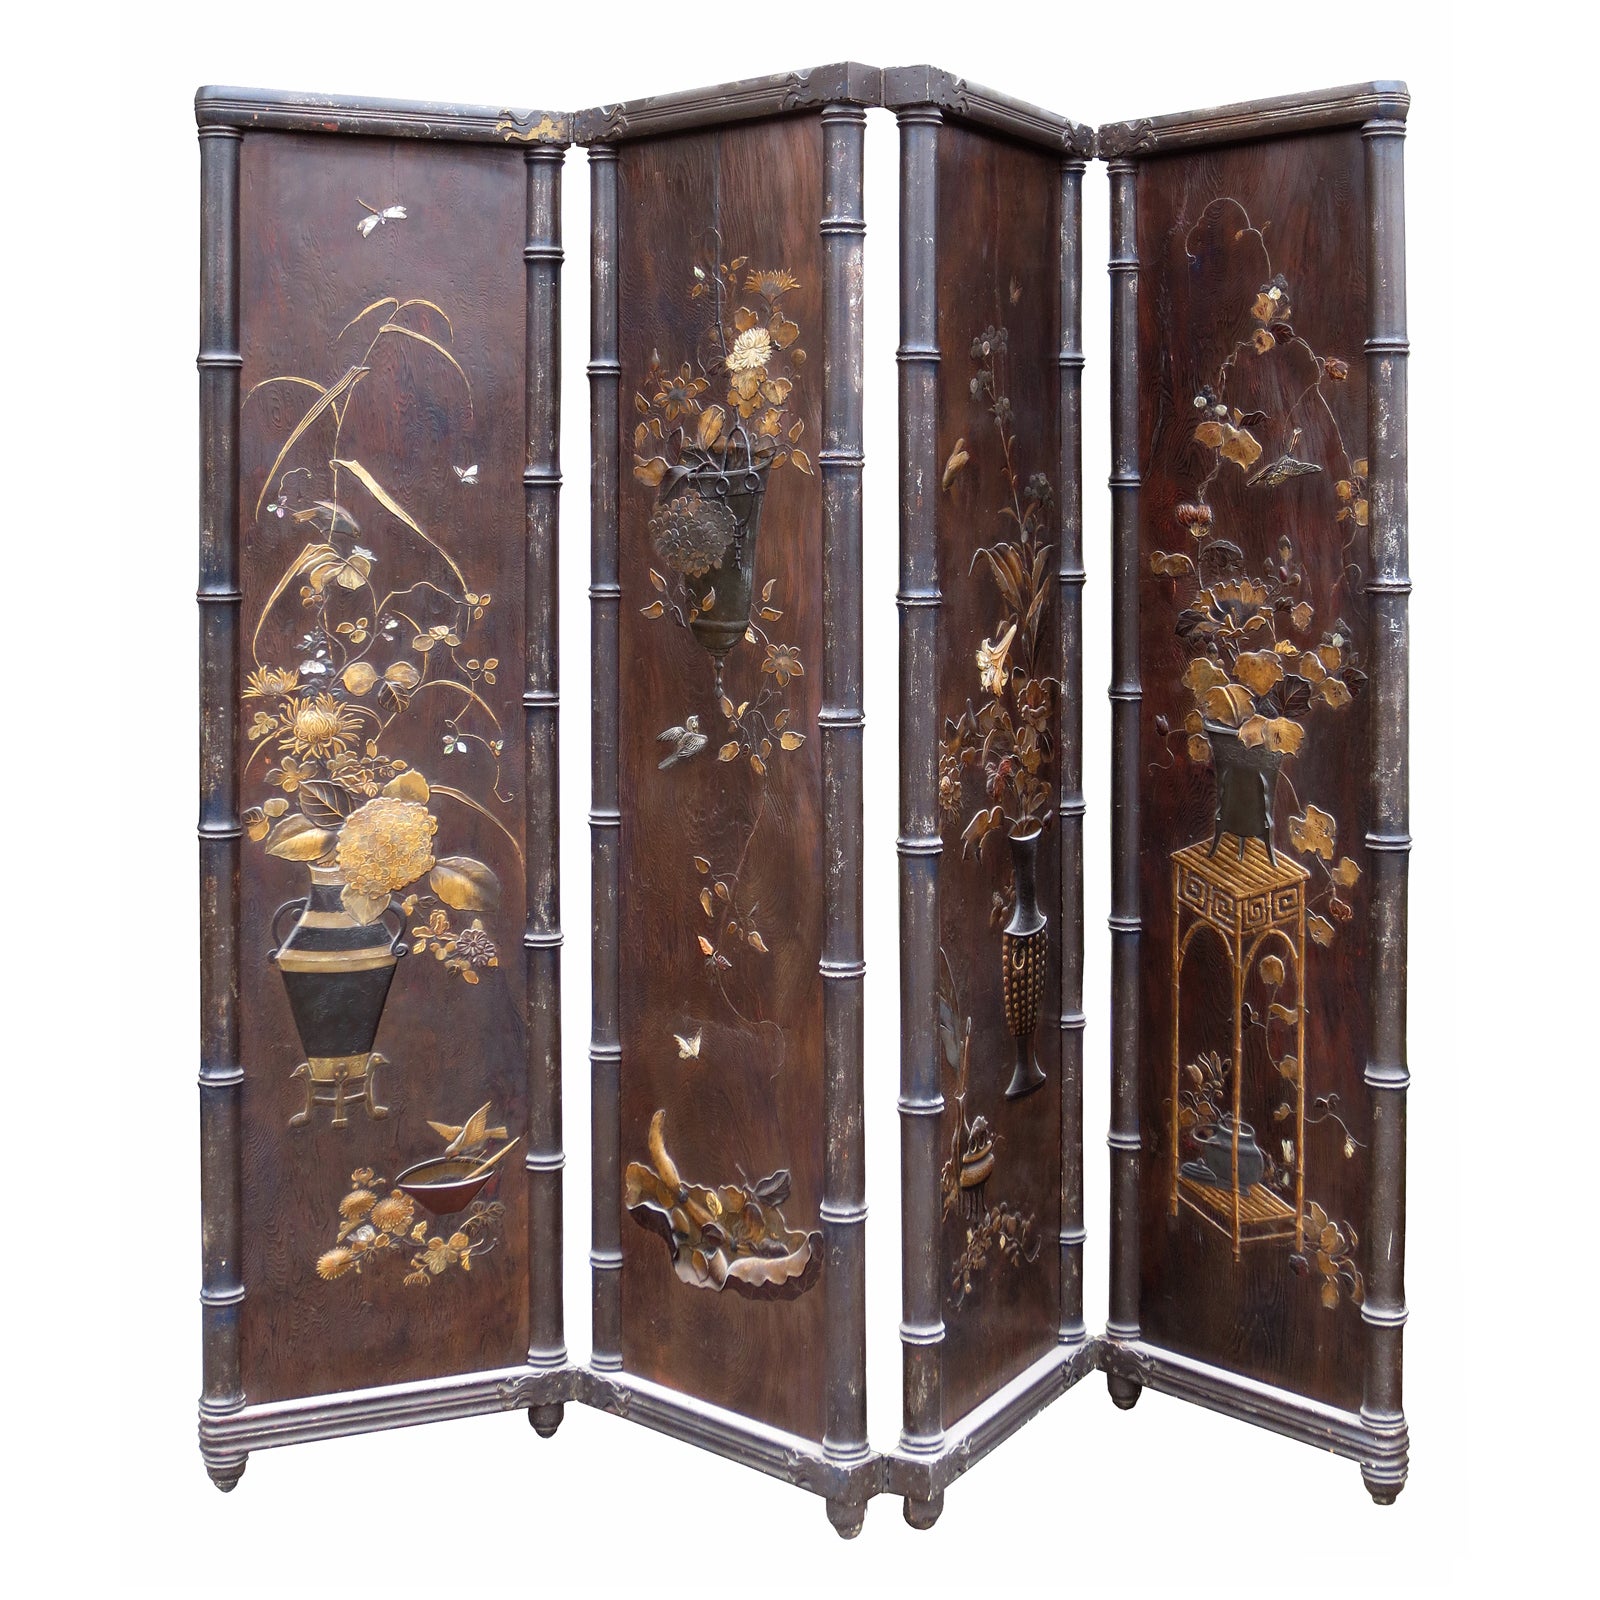 18th-19th Century Carved & Gilded Four-Panel Screen Edged in Faux Bamboo